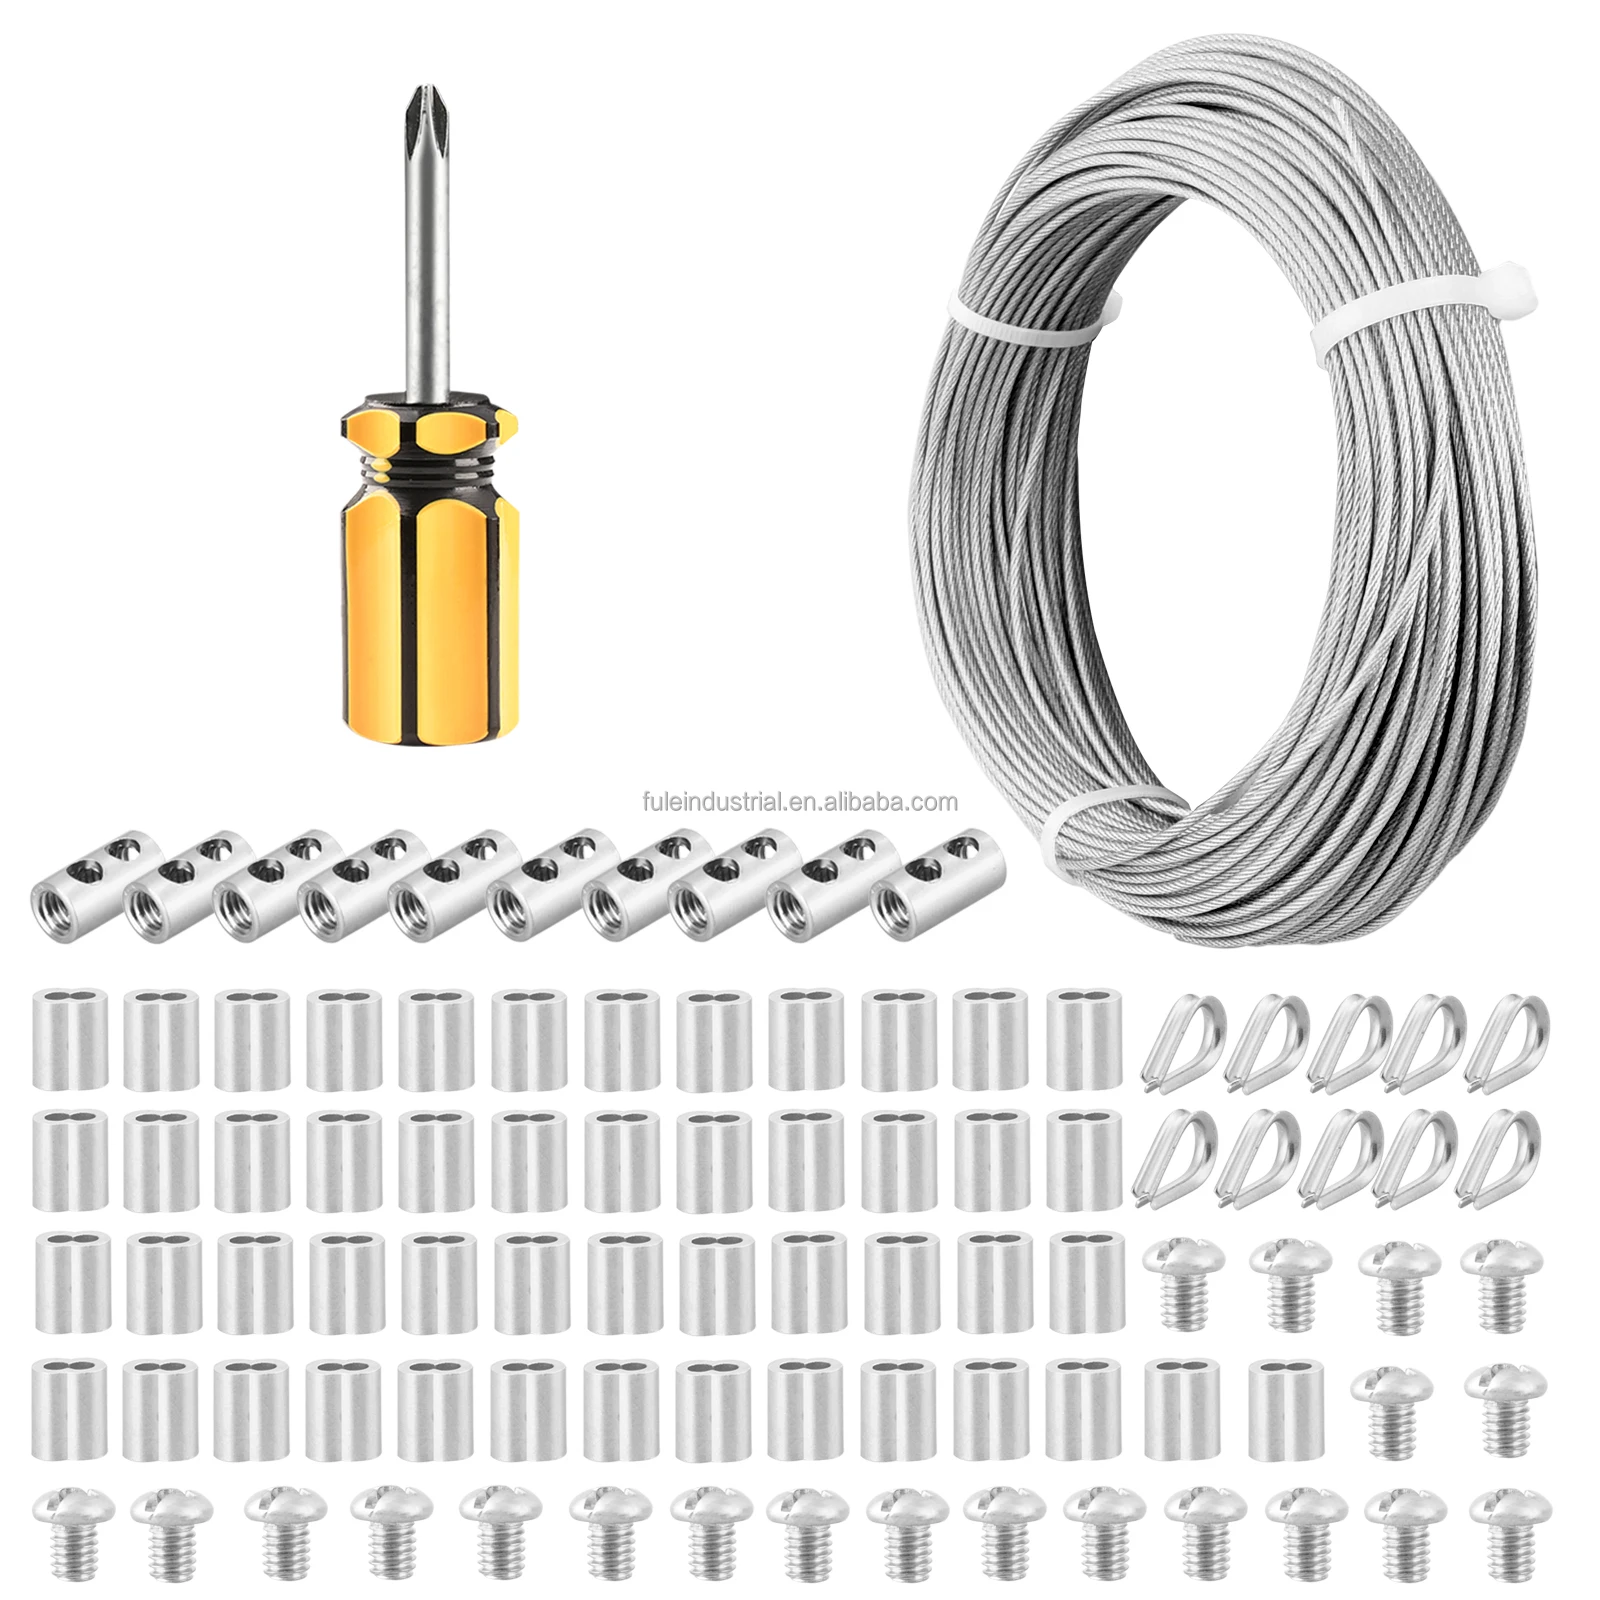 

Home & Garden Fencing Wire Kit with M2 Thimbles Crimping Sleeves Stainless Steel Wire Rope Cable Railing Picture Wire Garden Kit